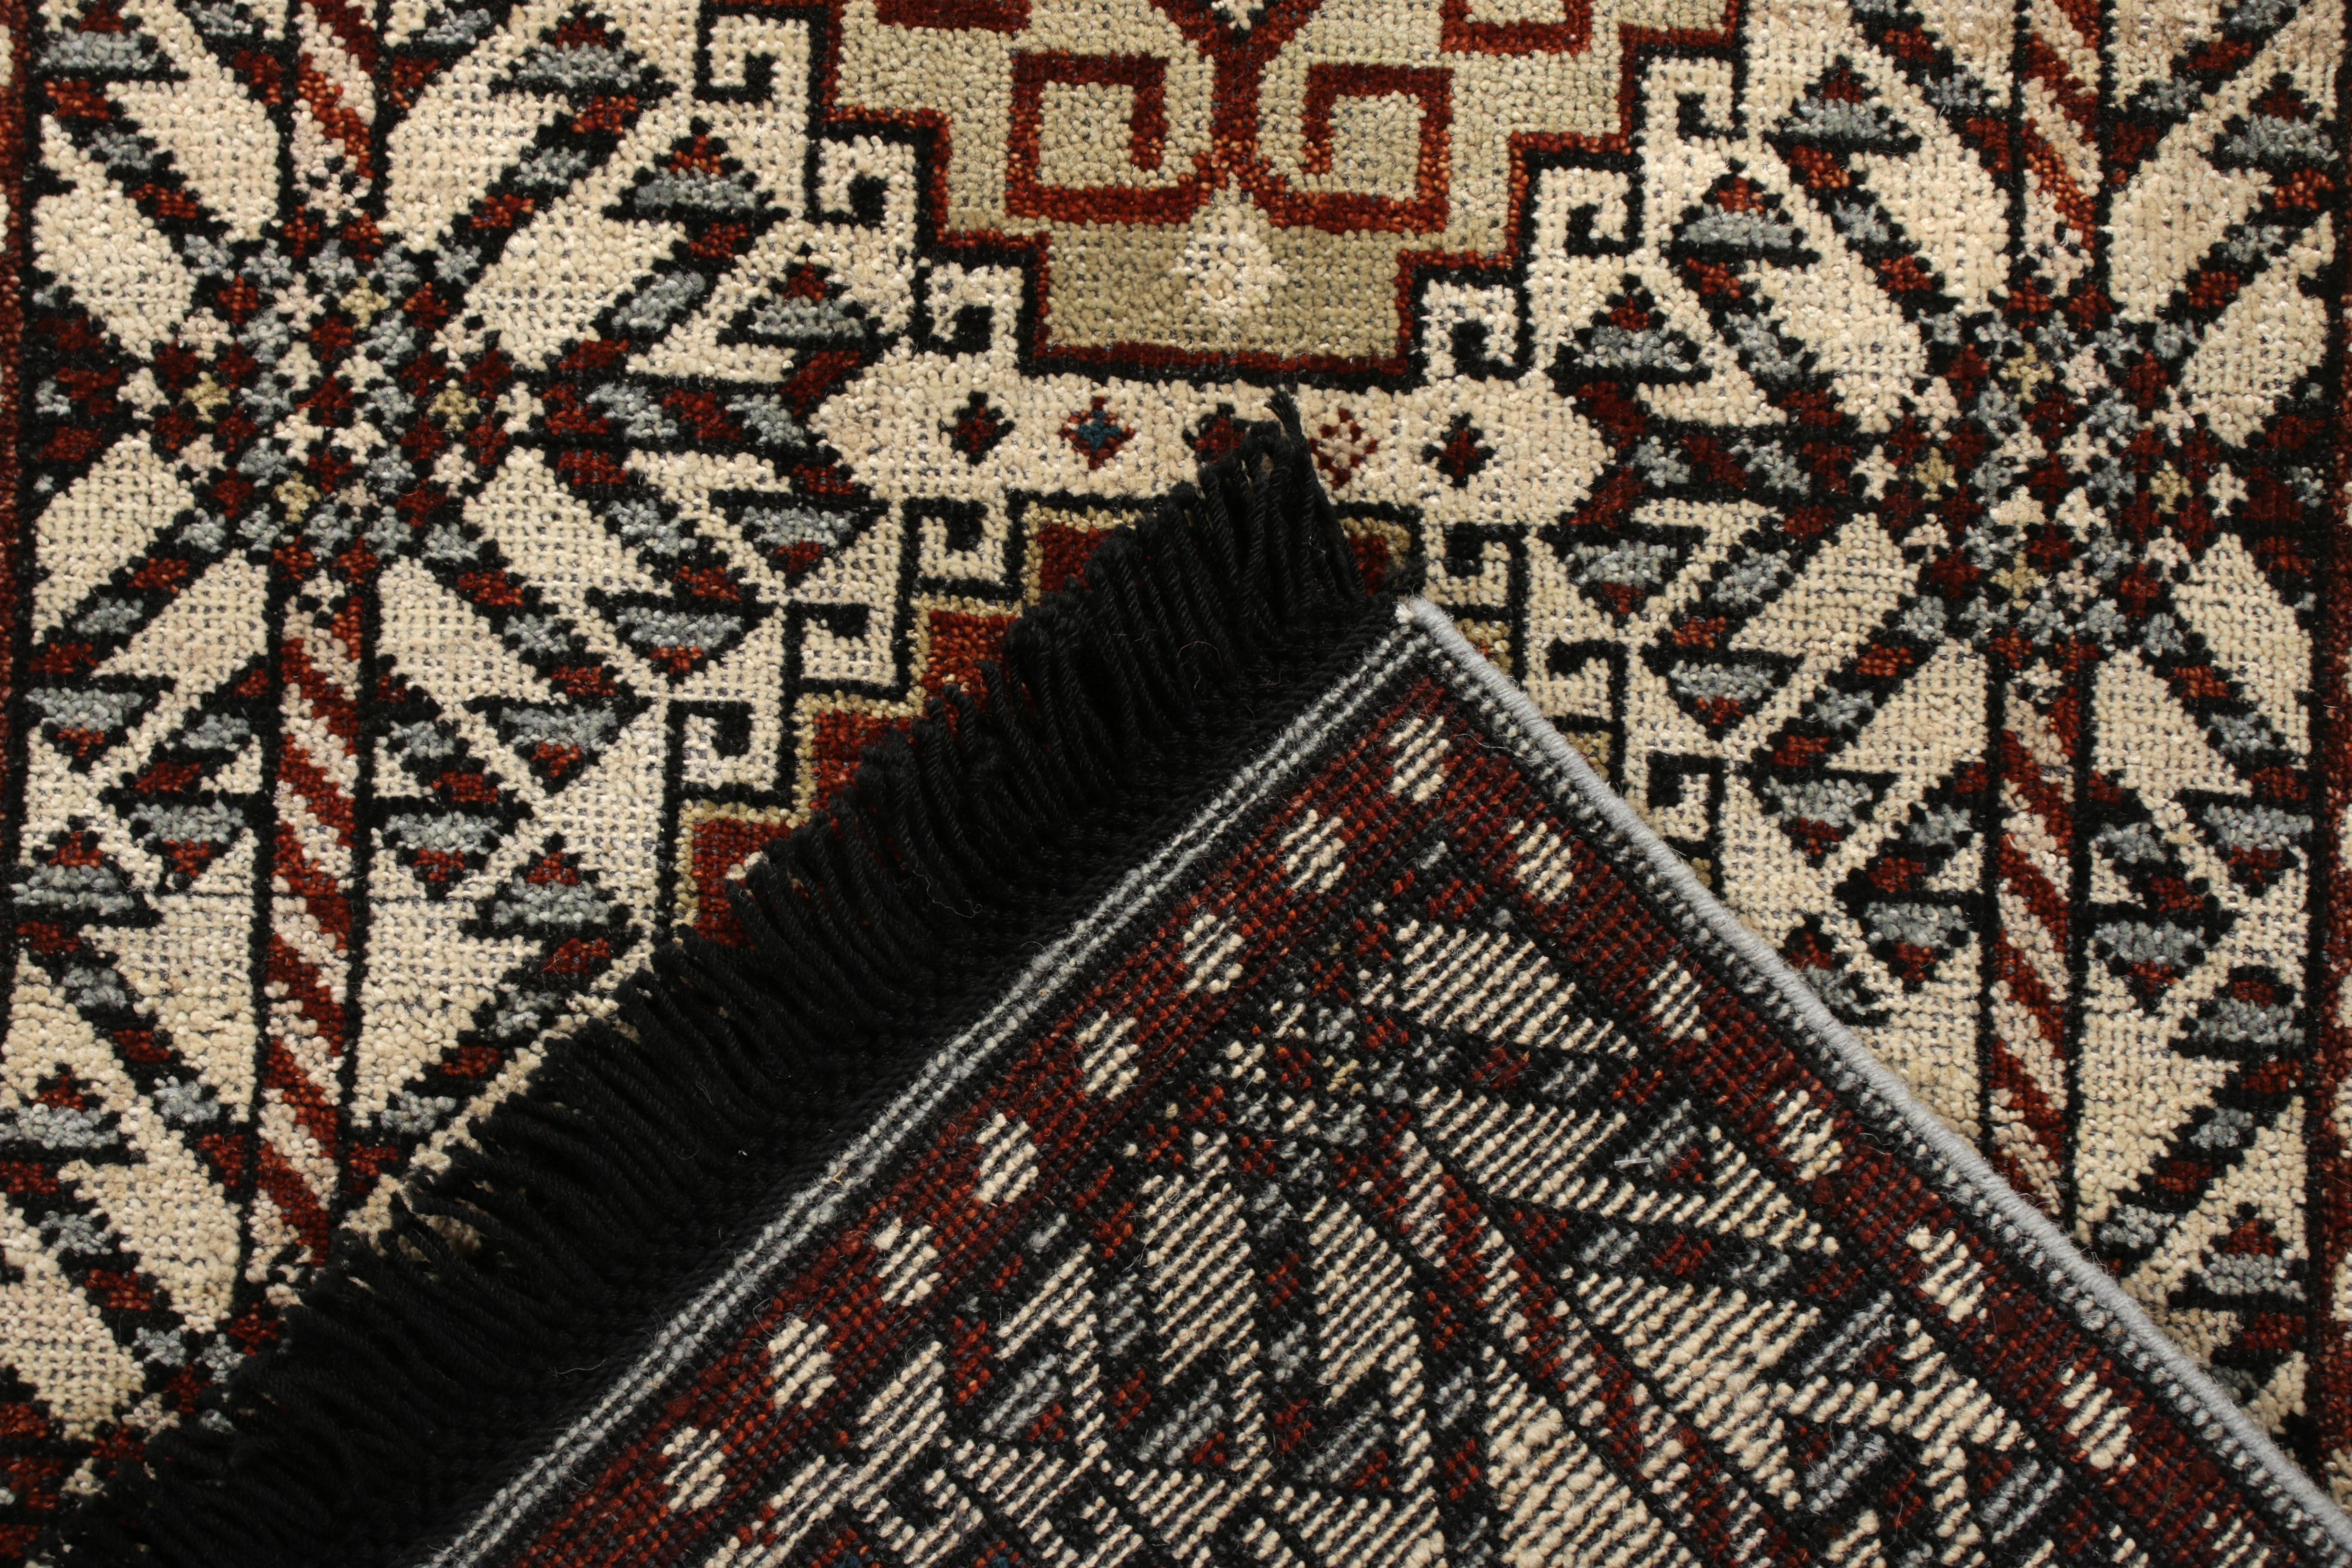 Hand-Woven Rug & Kilim's Hand Knotted Qashqai Style Rug in Beige Red Geometric Pattern For Sale